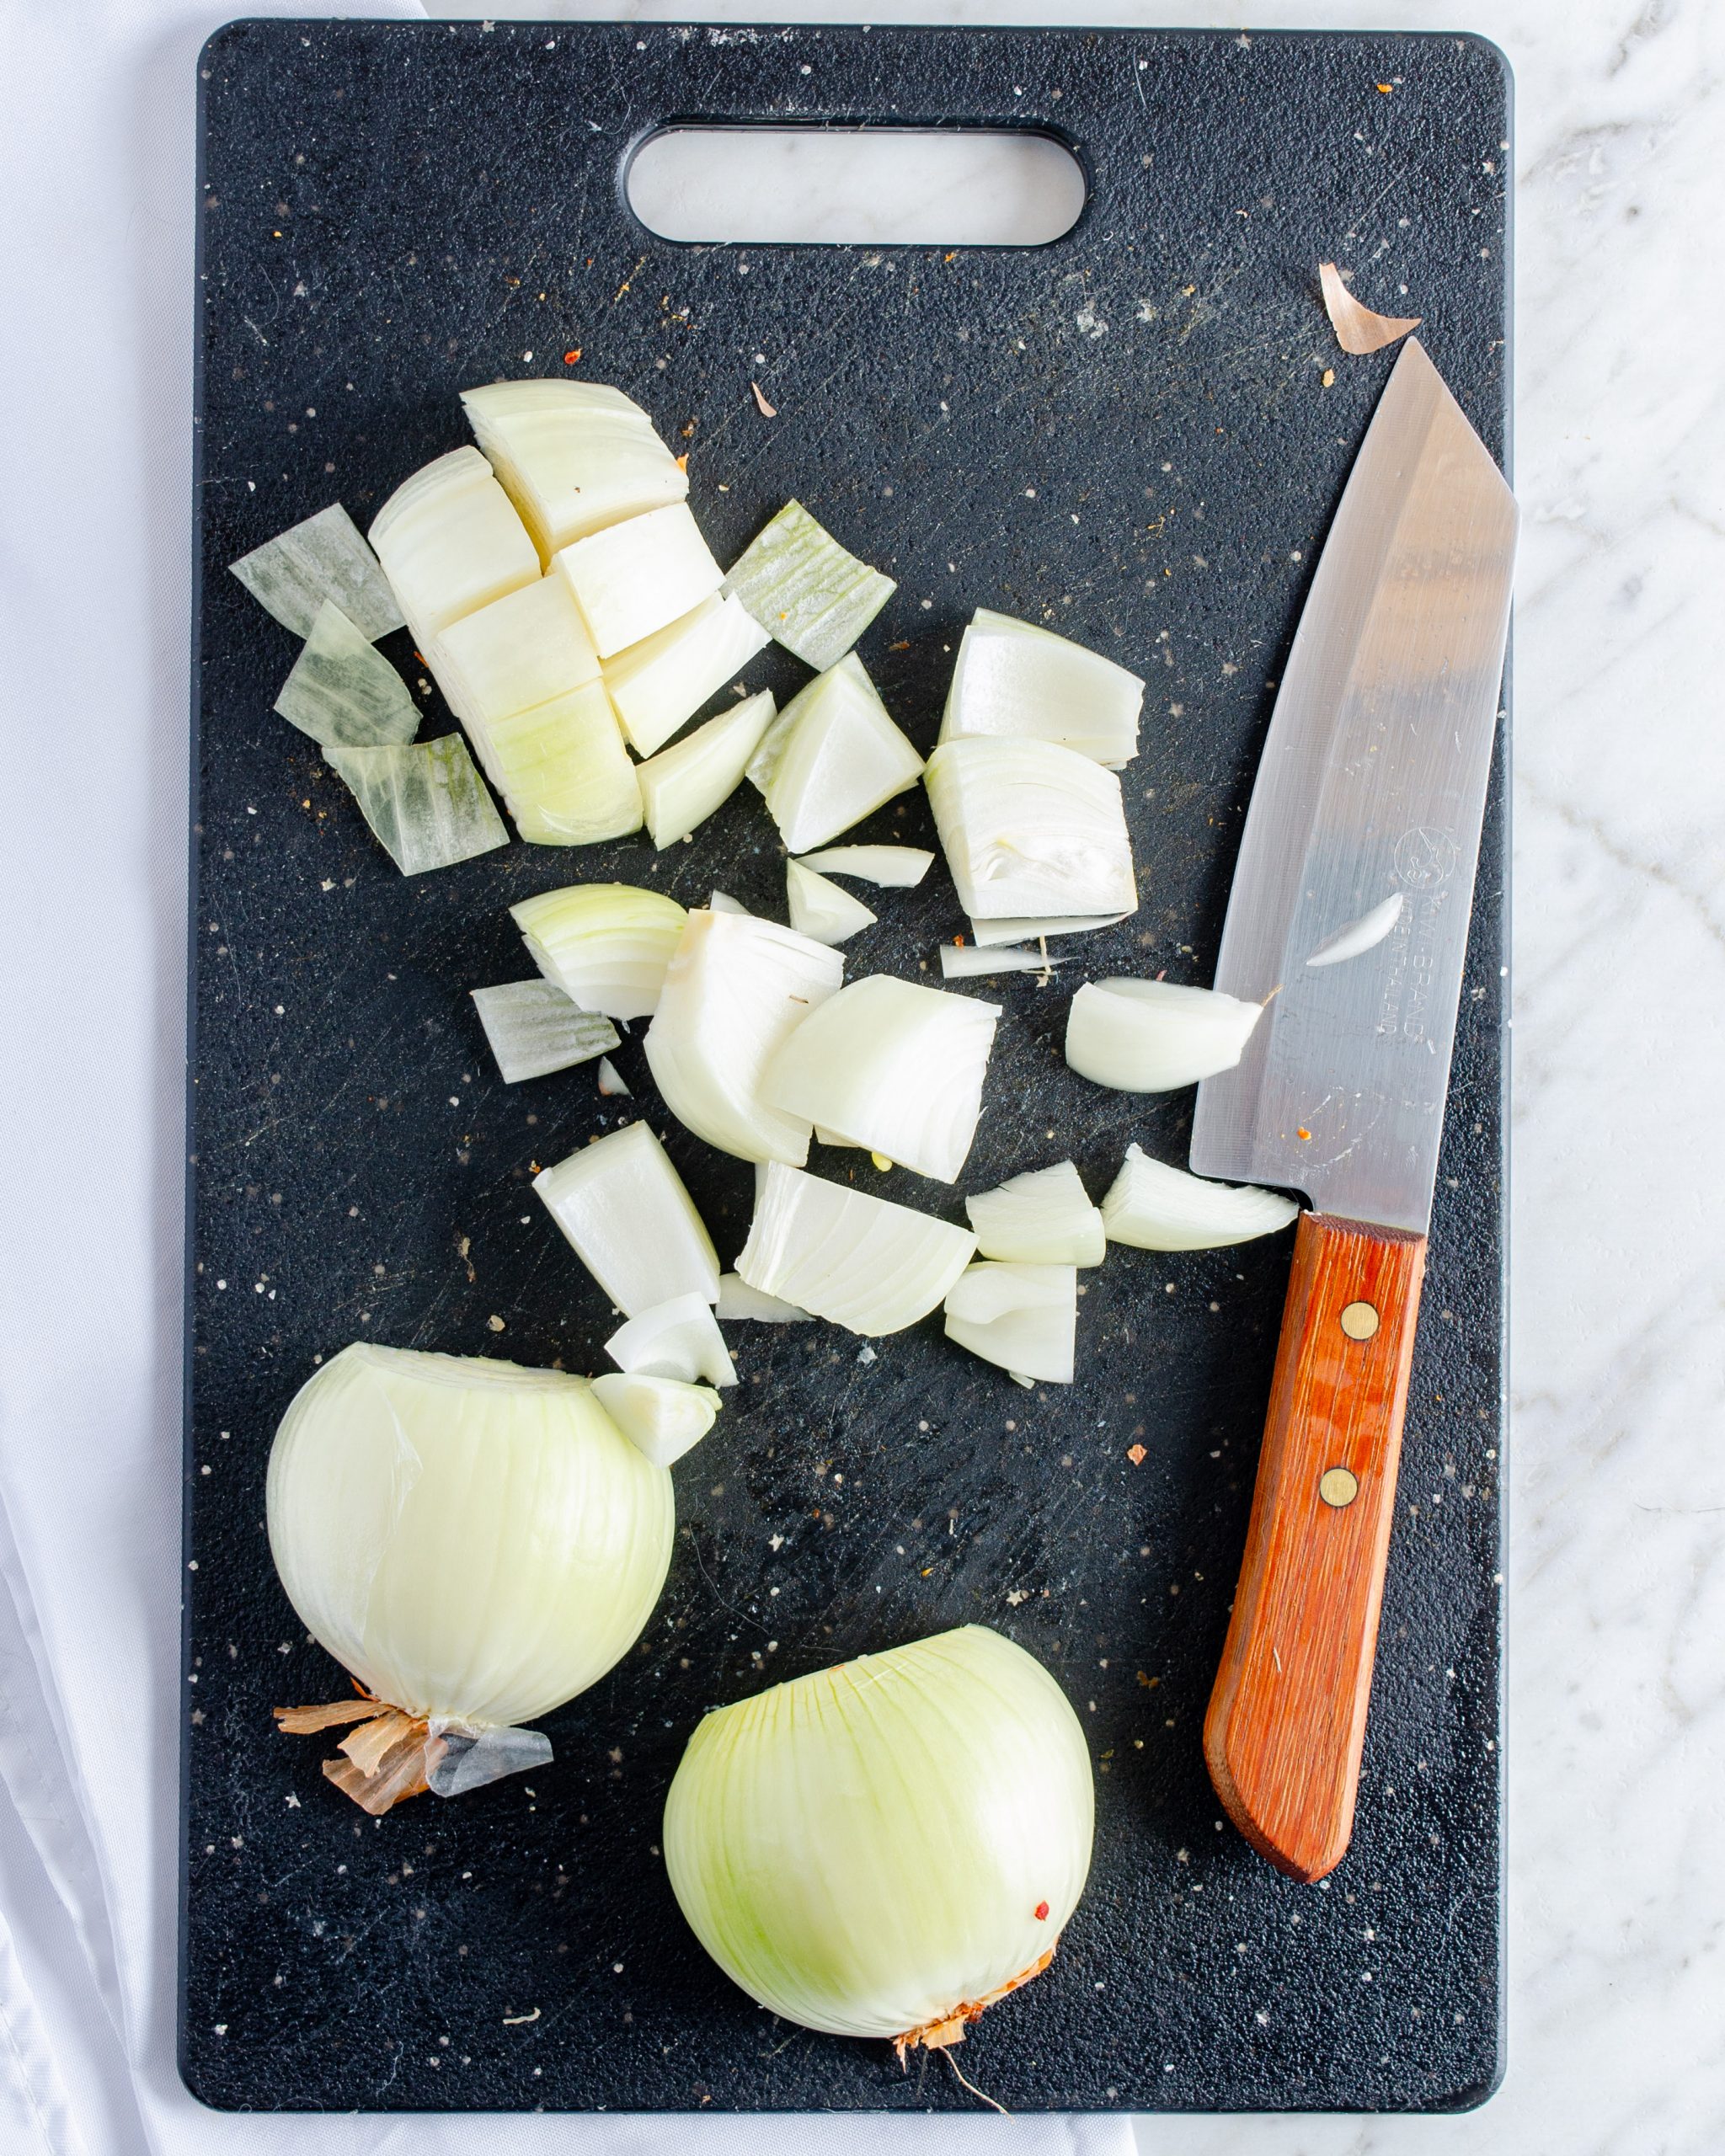 Cut the onions into small slices. 